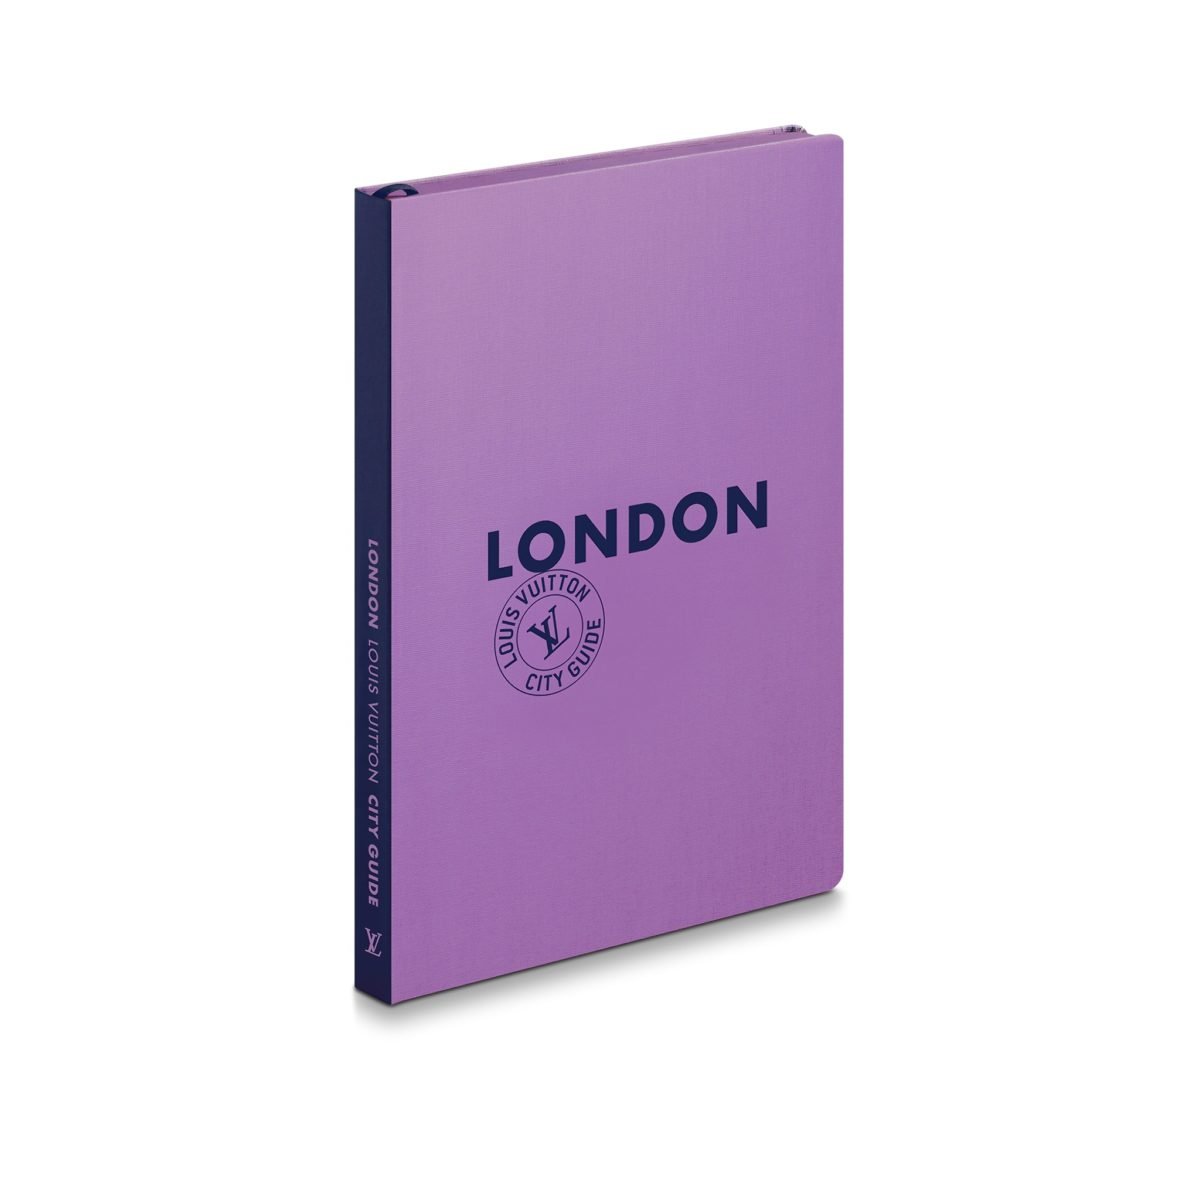 Louis Vuitton Dropped Their 2021 City Guide Books Just In Time For